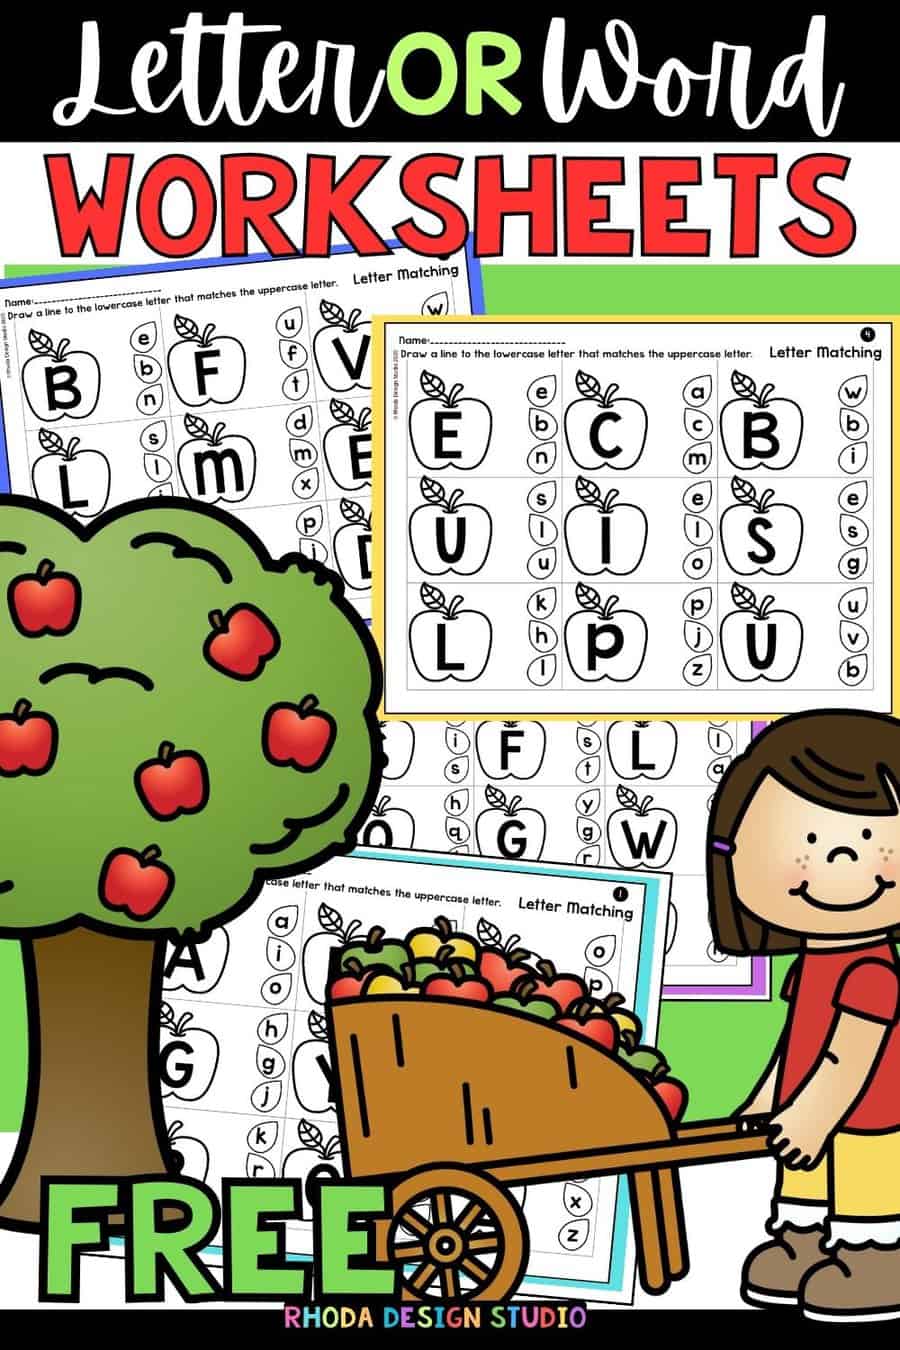 Using letter or word phonics sort worksheets, educators can introduce learners to the concepts of initial sounds, vowel sounds, and blends in an engaging and interactive way. Free letter or word phonics sort worksheets.